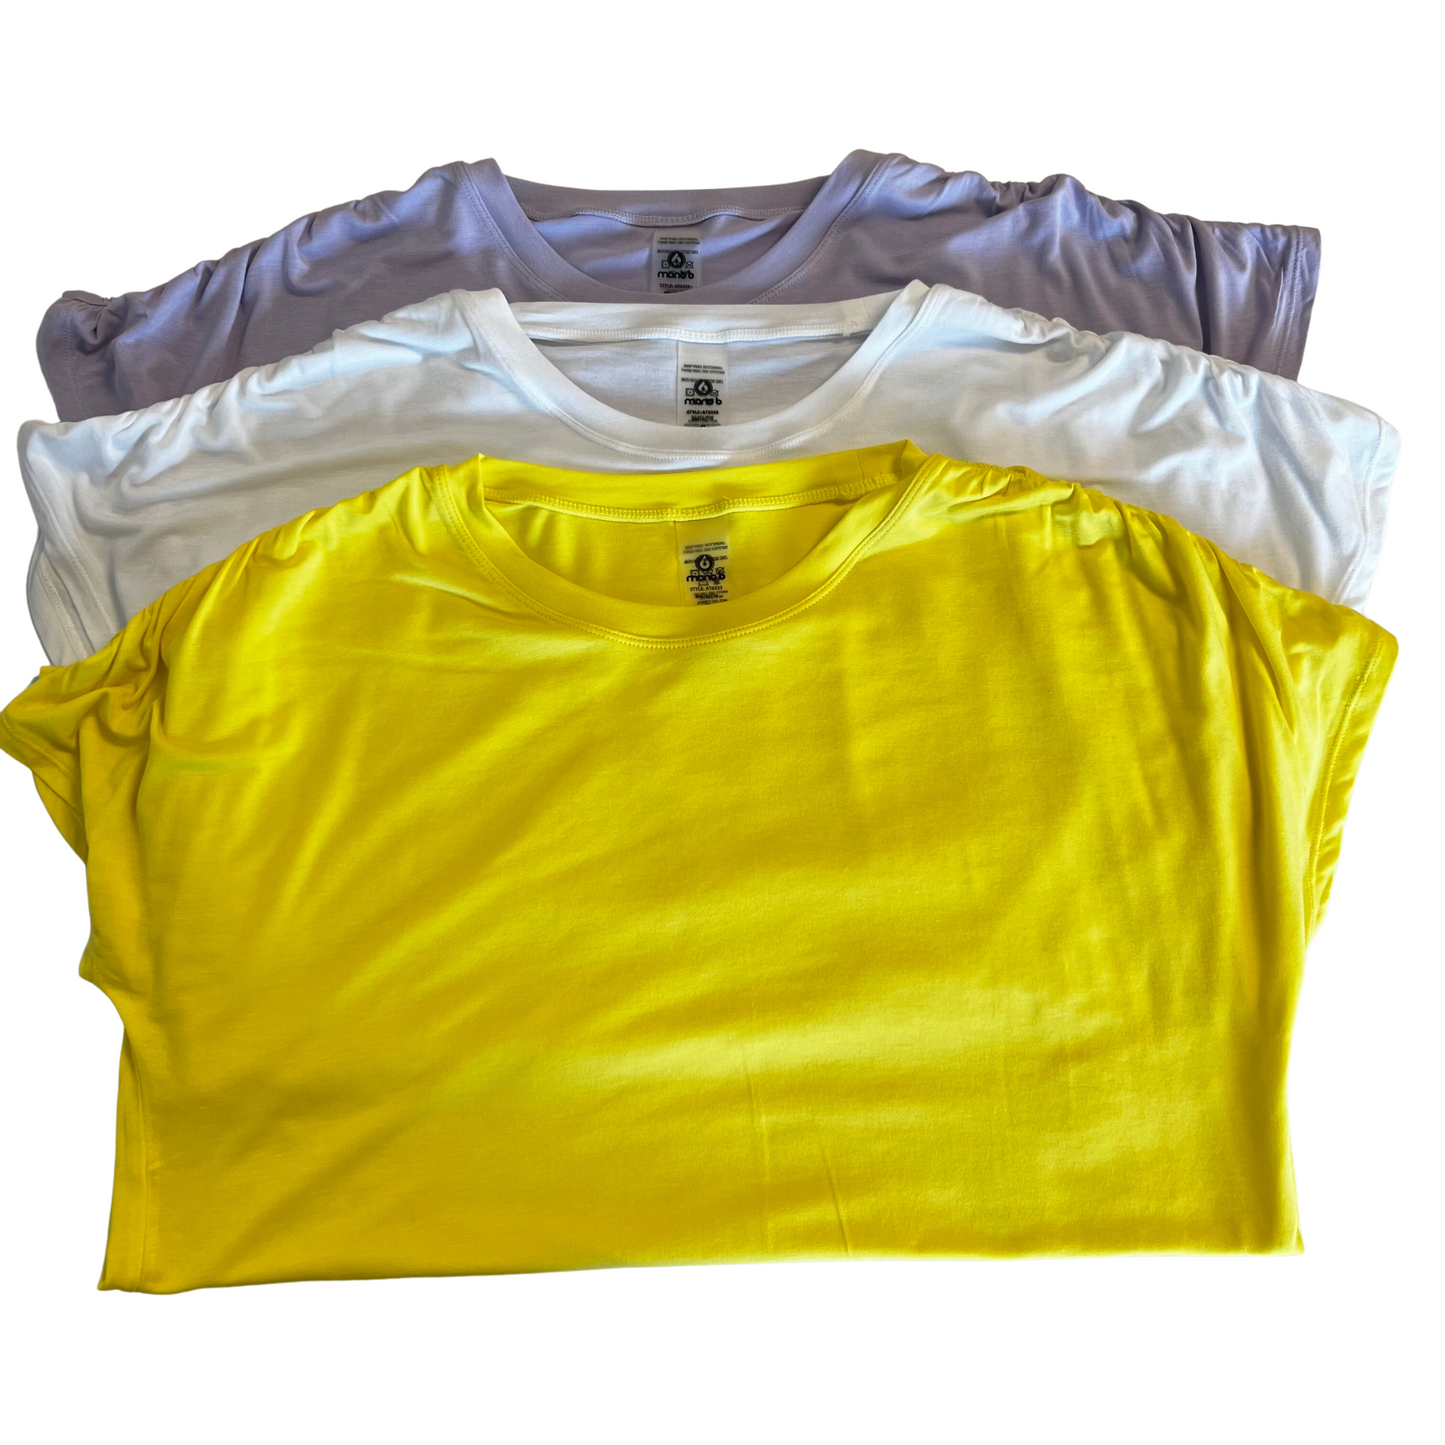 This Workout Tee is available in three colors - yellow, white, and grey - and made from lightweight, breathable fabric that effectively wicks away moisture. This ensures a cool and comfortable workout experience, so you can stay active longer.